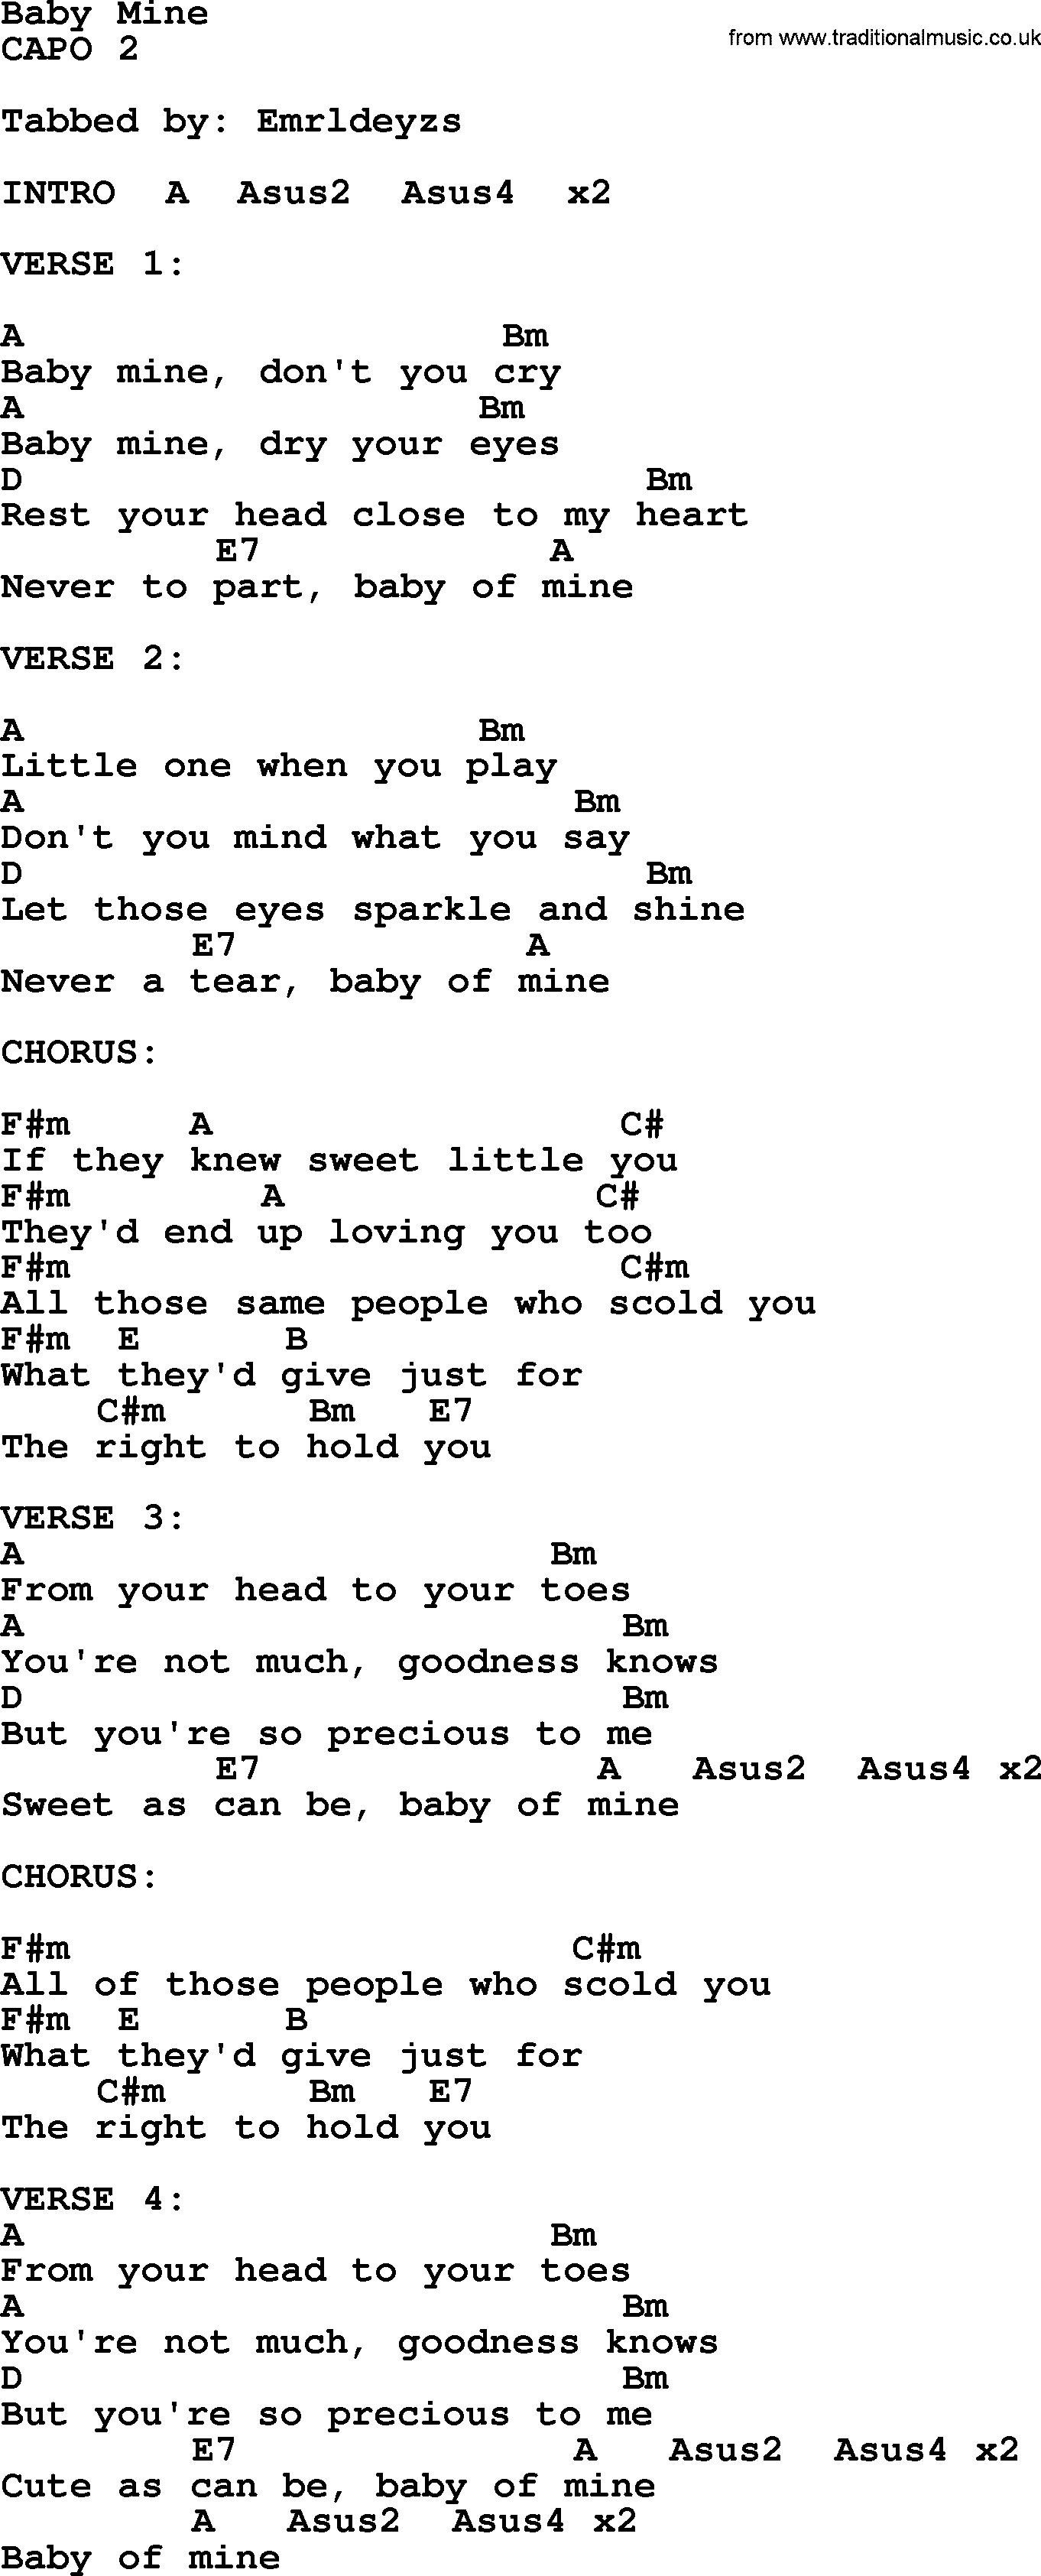 Bluegrass song: Baby Mine, lyrics and chords